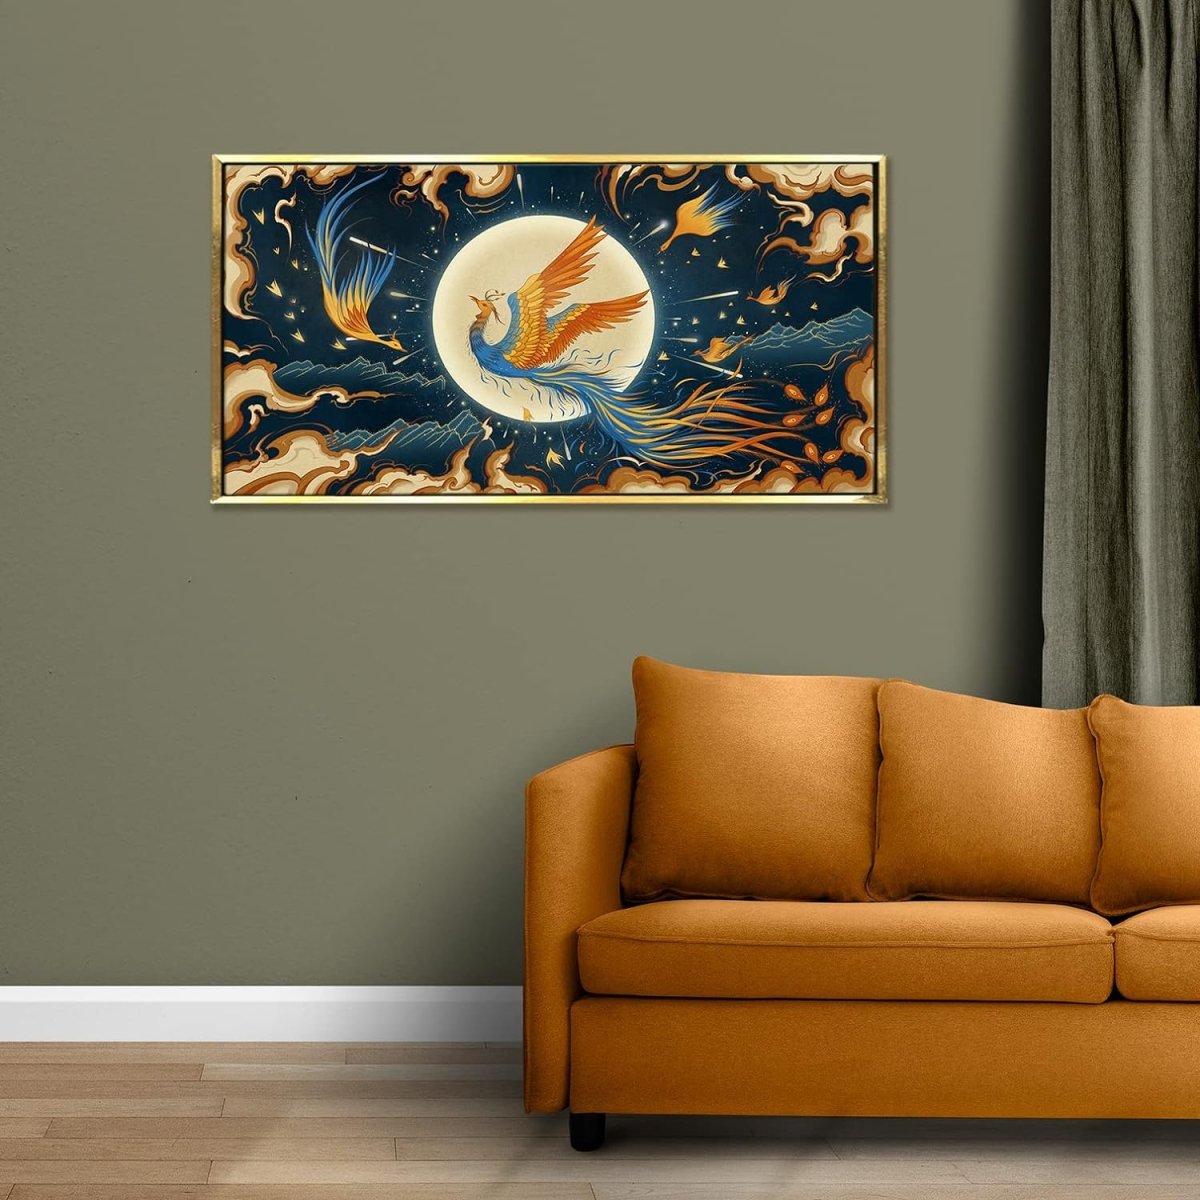 Guardian of the Night Canvas Wall Art for Bedroom (36 x 18 Inches)